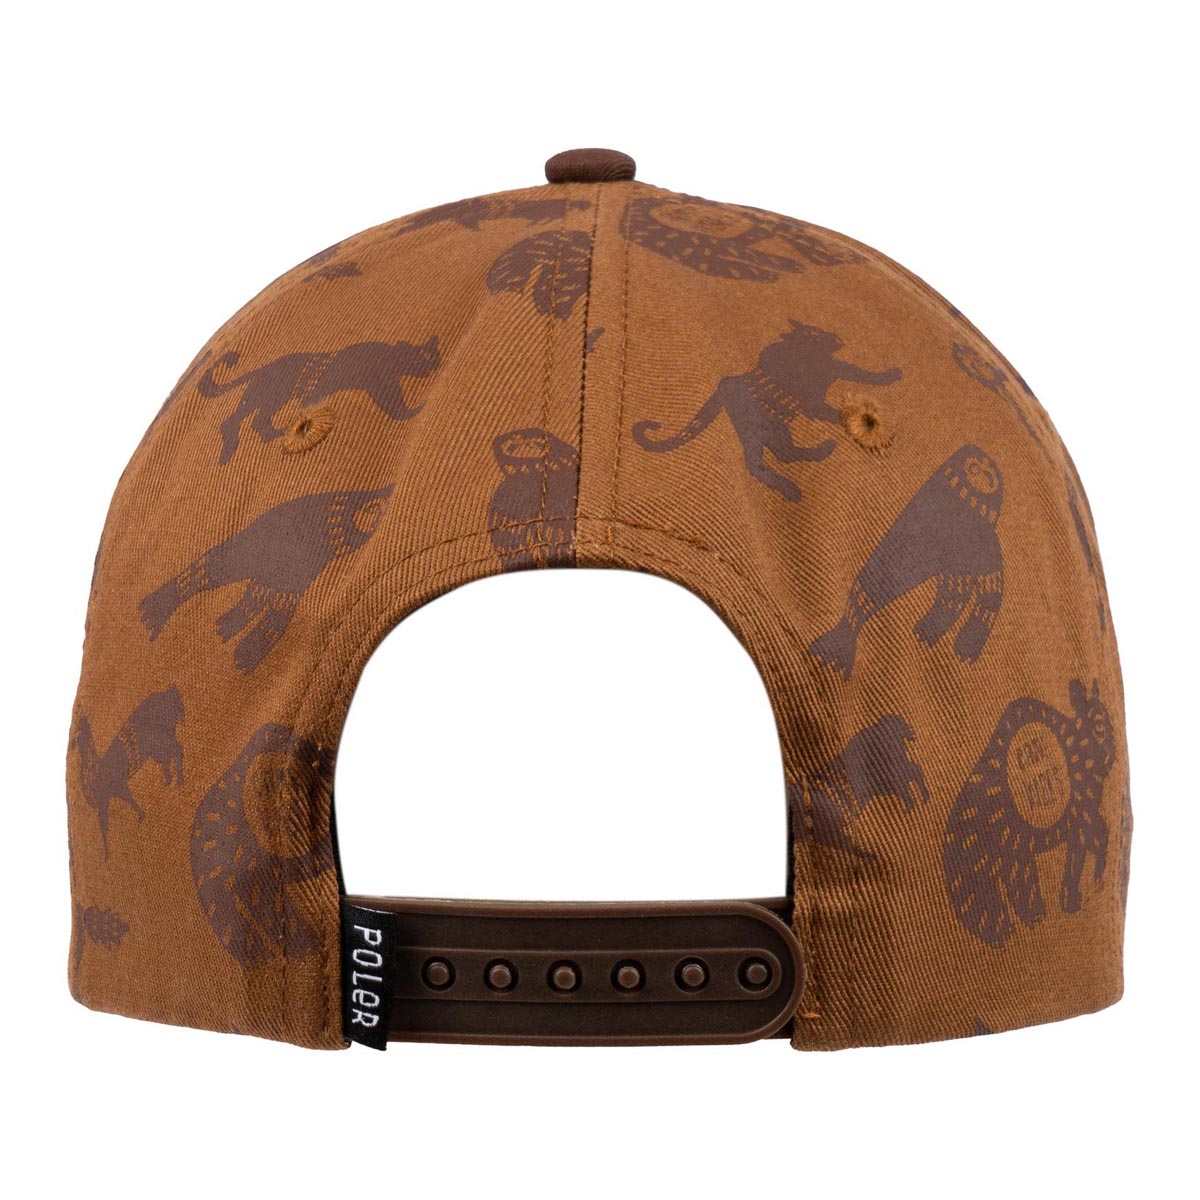 Poler Print Patch Hat - Critter Brown image 2